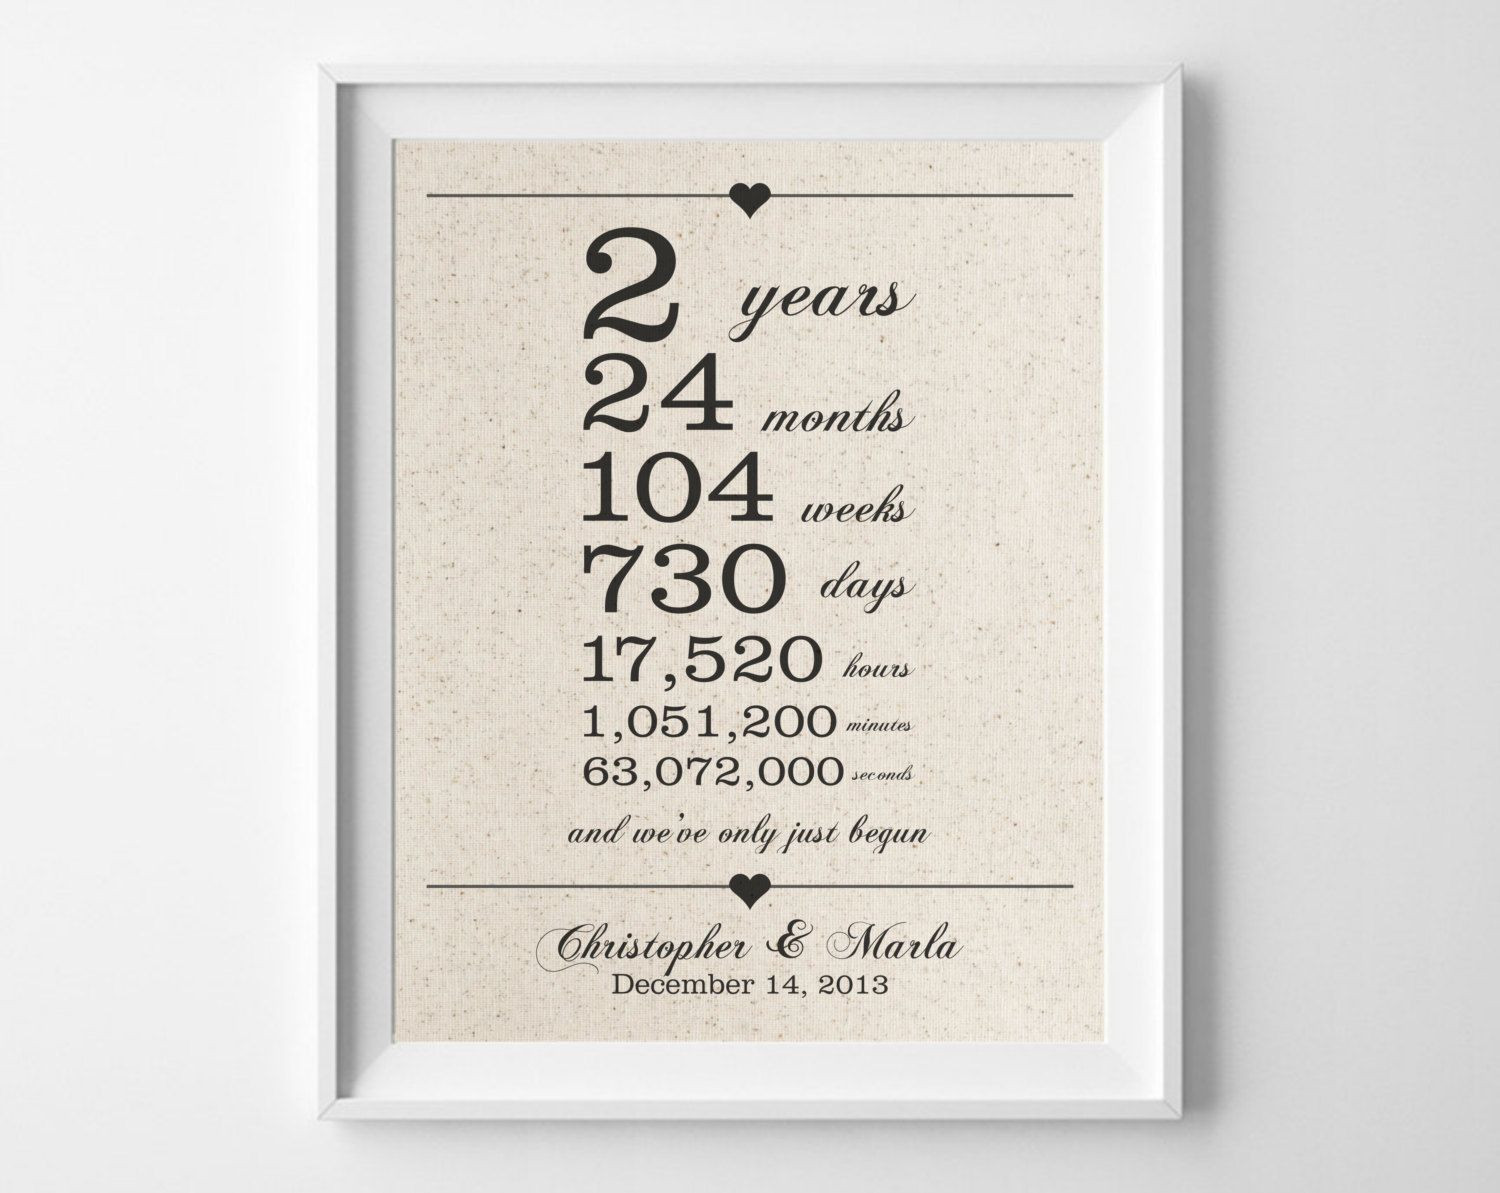 Second Wedding Anniversary Gift Ideas For Husband
 2 years to her Cotton Anniversary Print